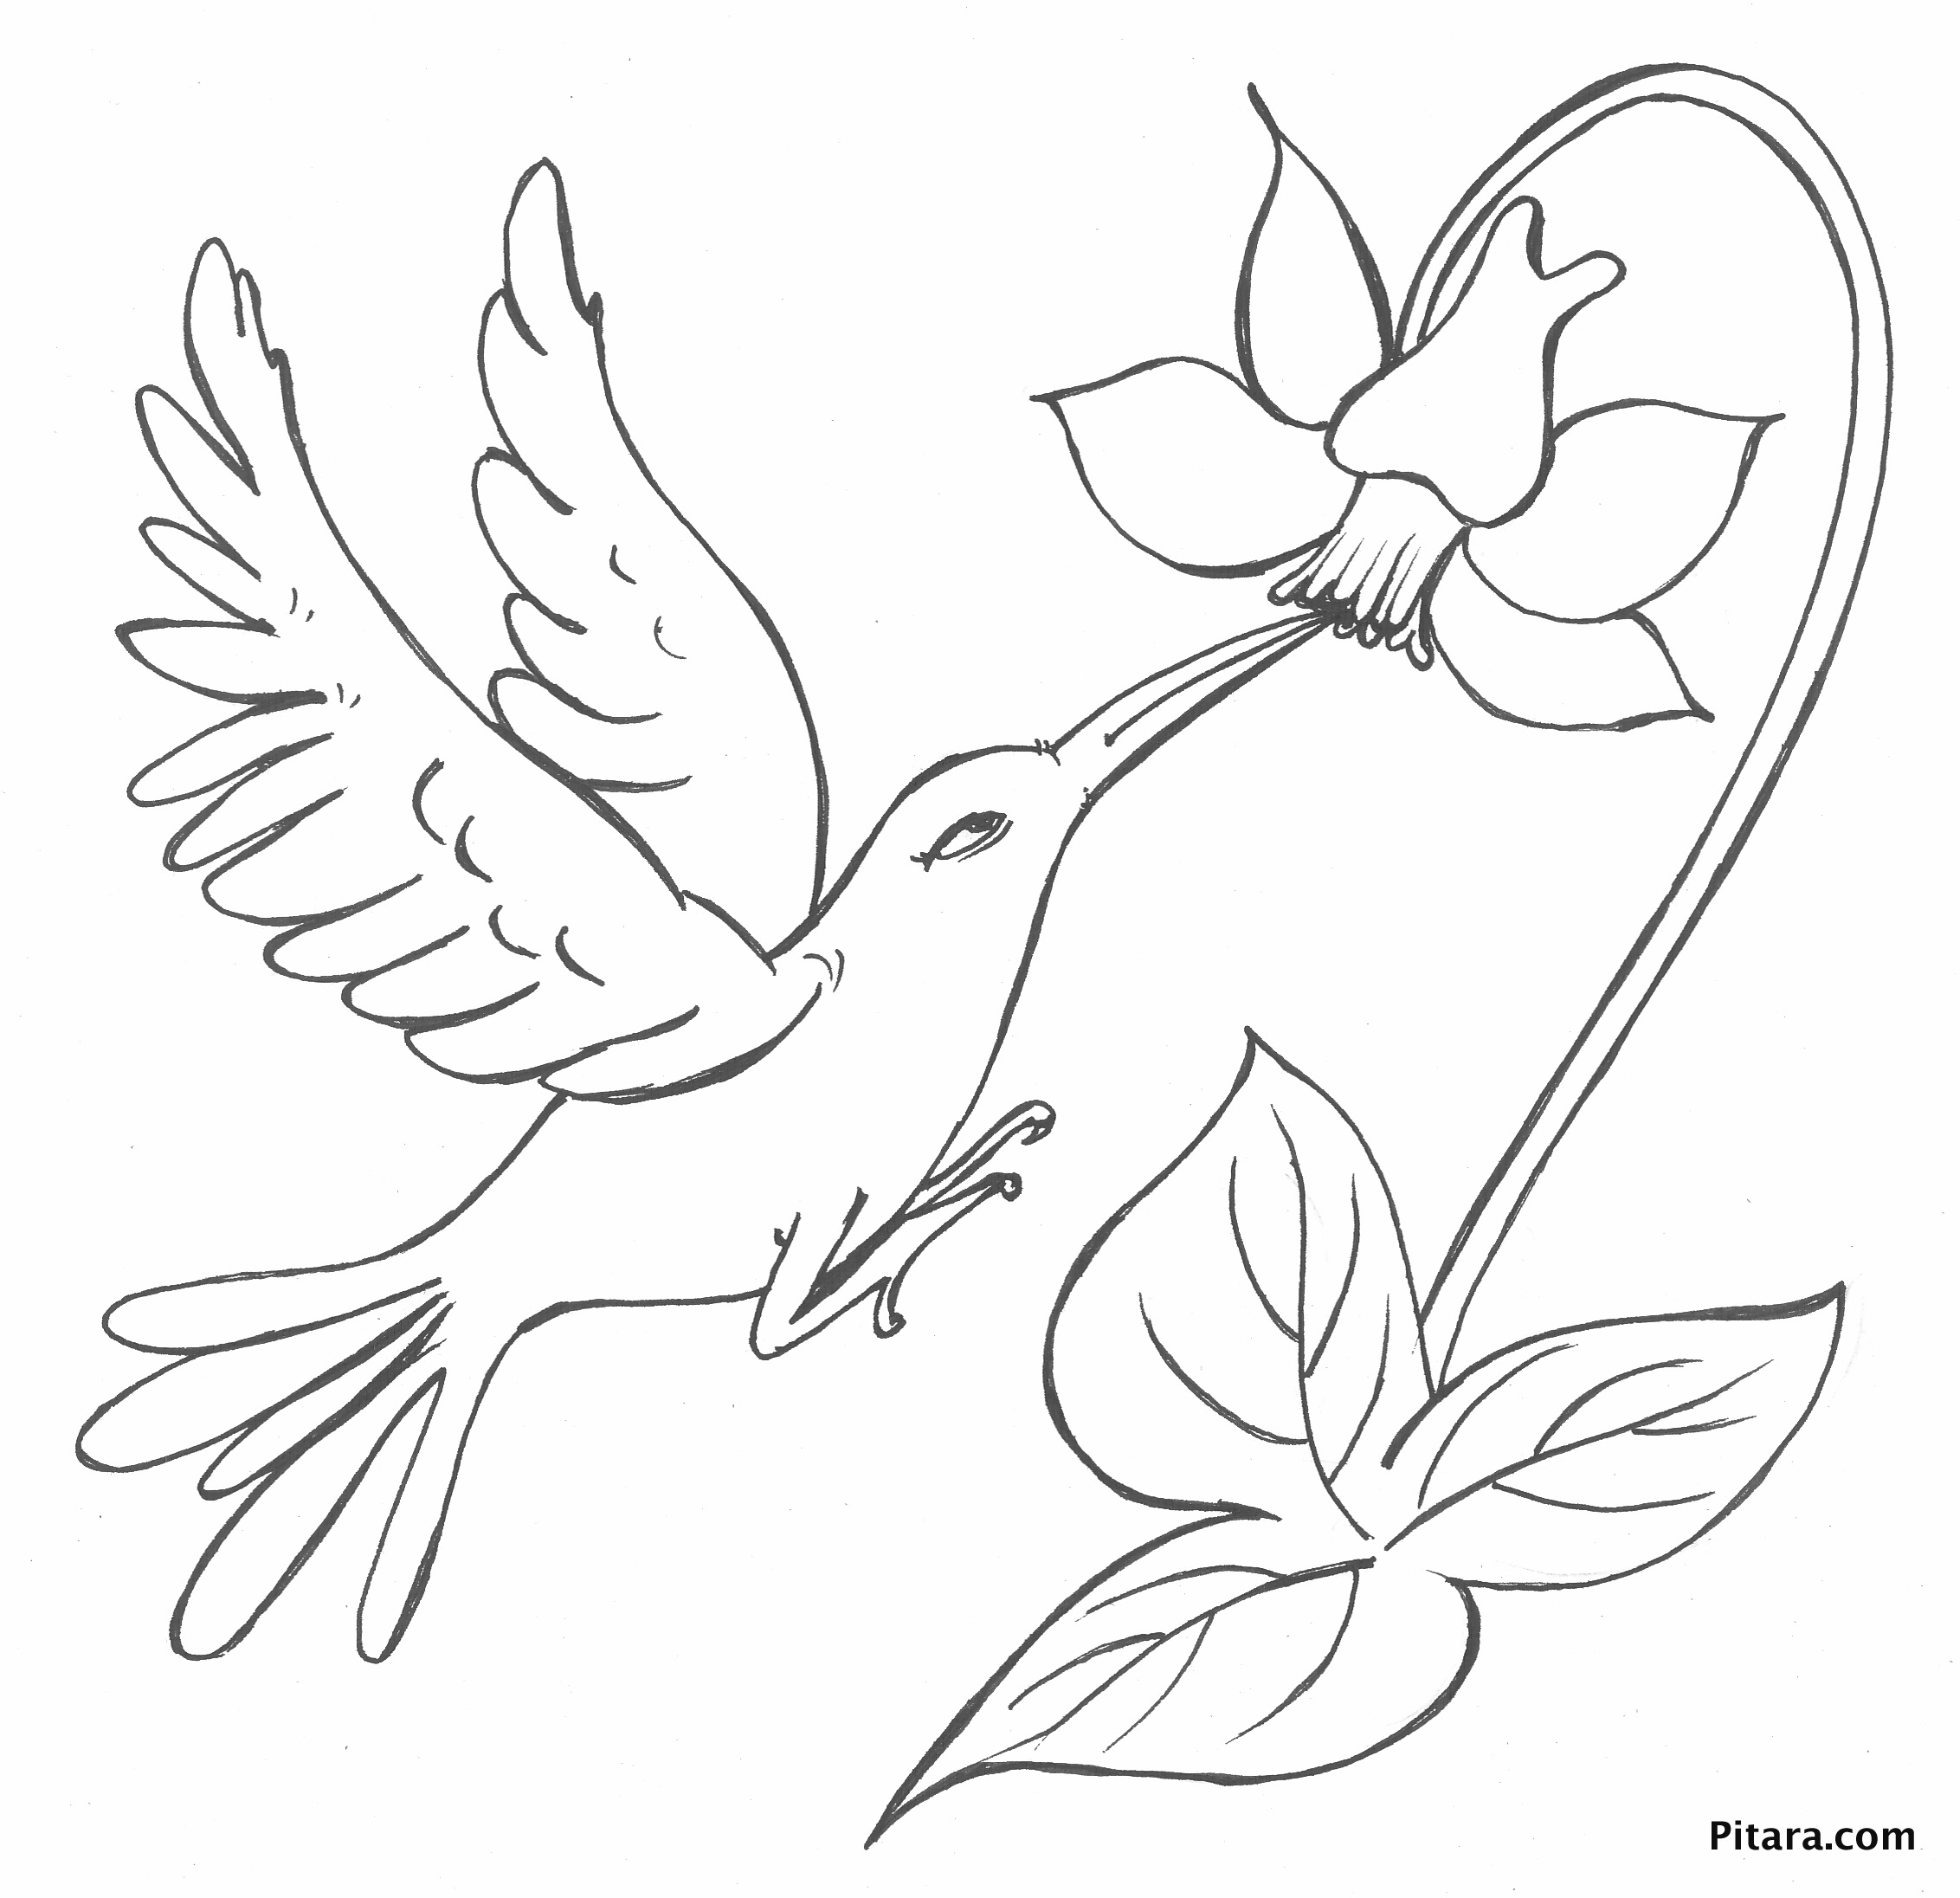 Bird Drawing Flower For Free Download - Bird And Flower Drawing. 